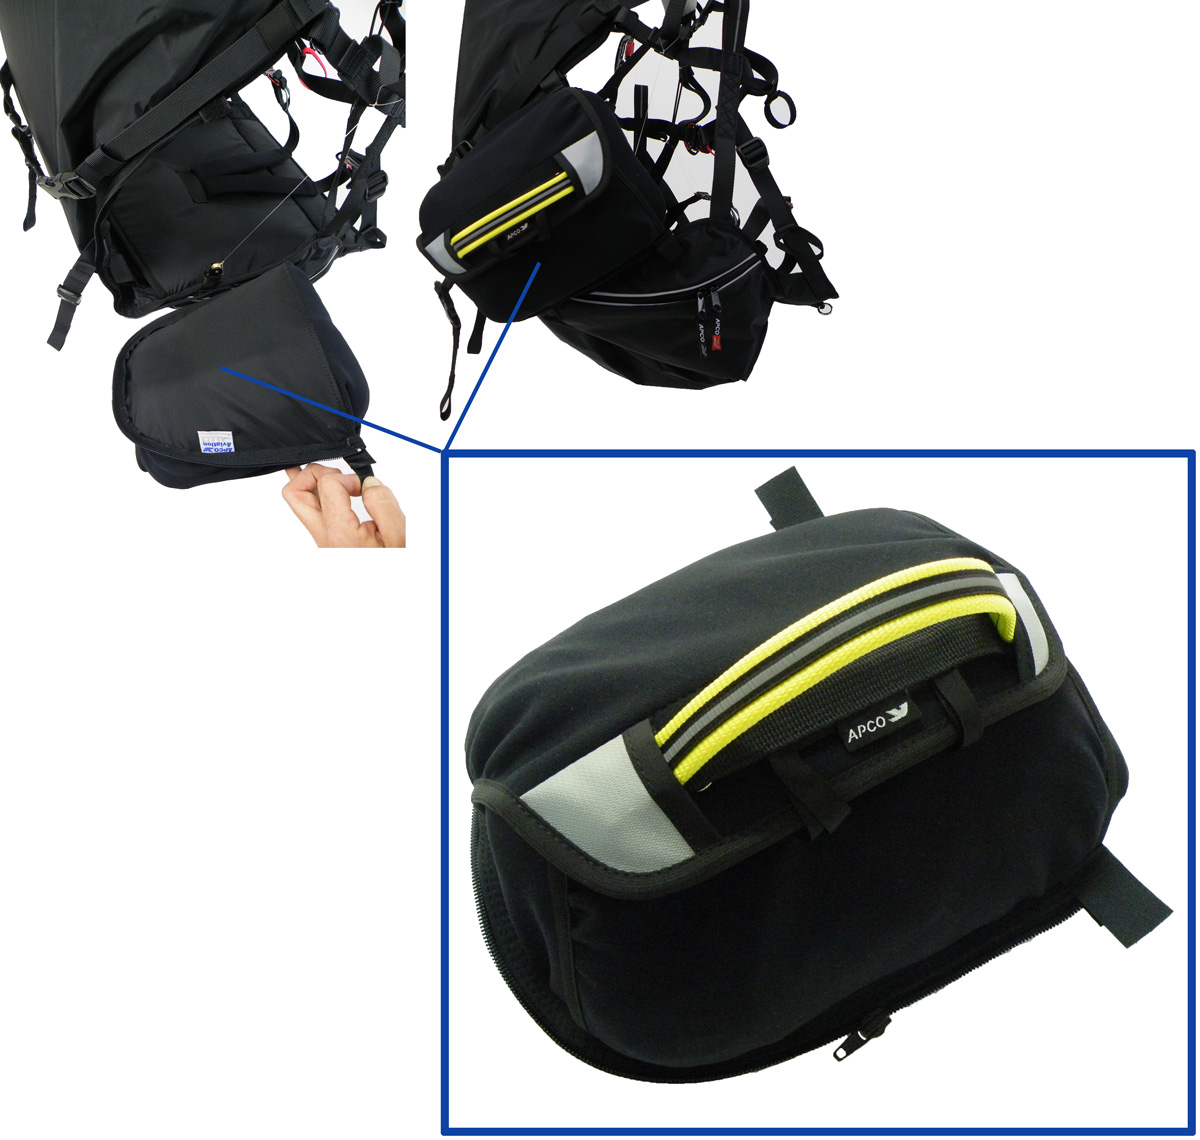 Zipped on Emergency Parachute compartment for SLT universal harness